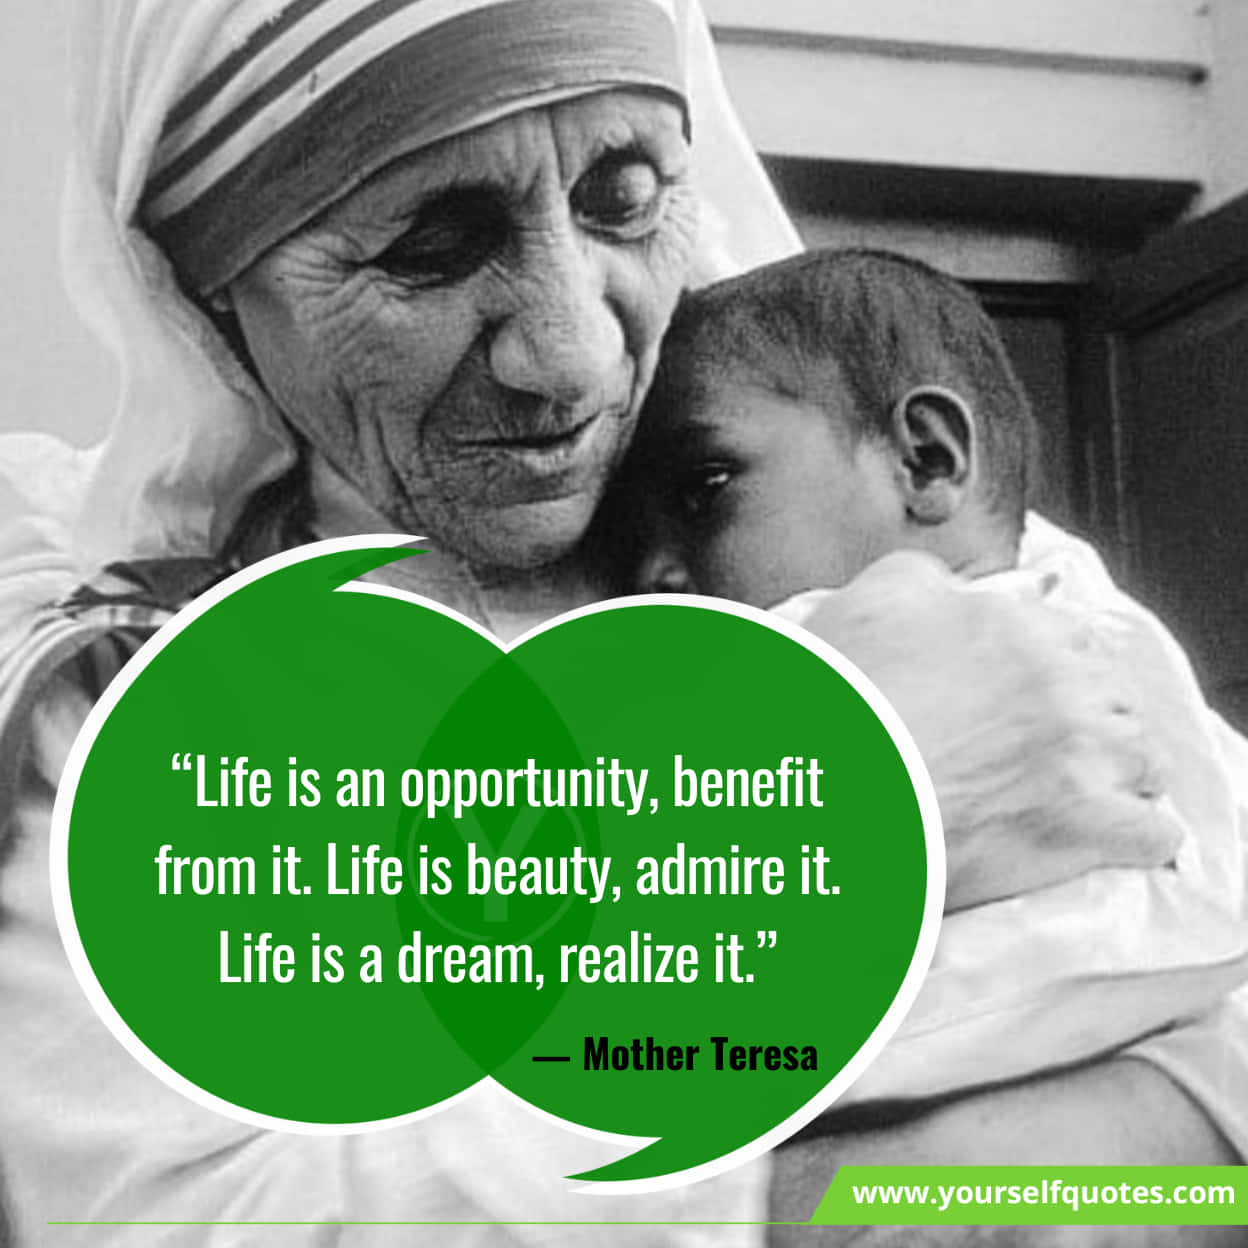 Mother Teresa Quotes About Love